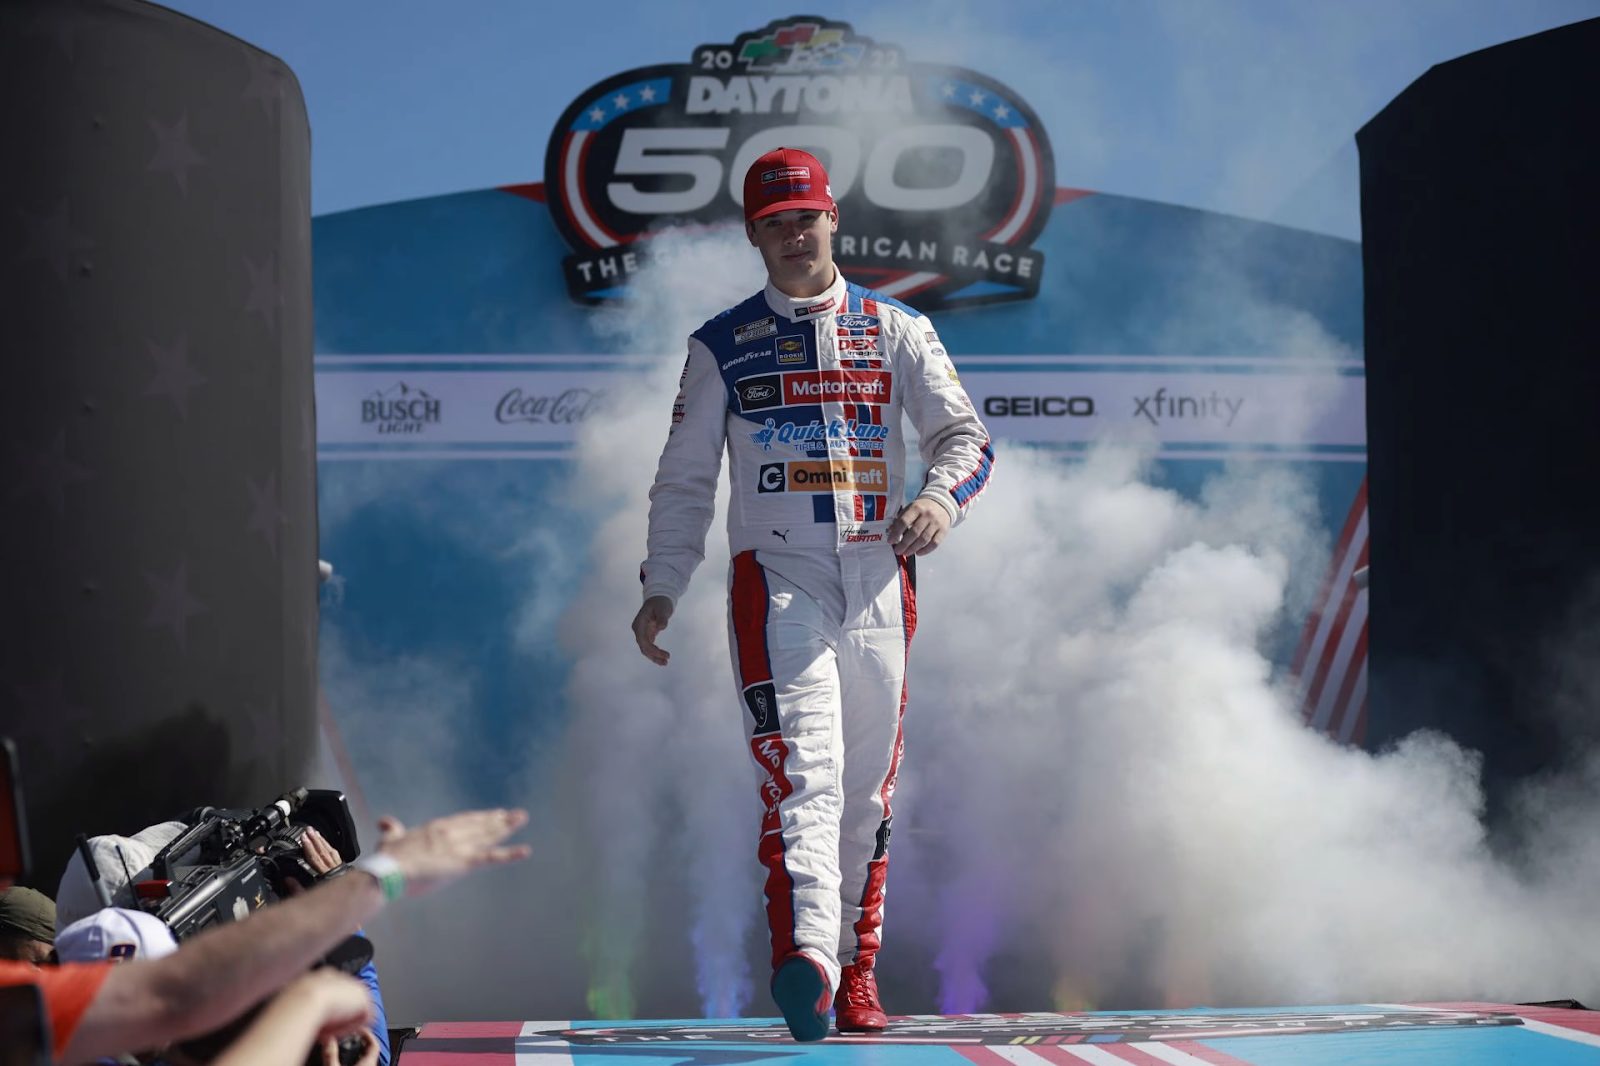 Top 10 NASCAR youngest drivers 2022. There are still seven races to go before the 16 NASCAR Cup Series drivers can clinch playoff positions for the postseason's 10 events.